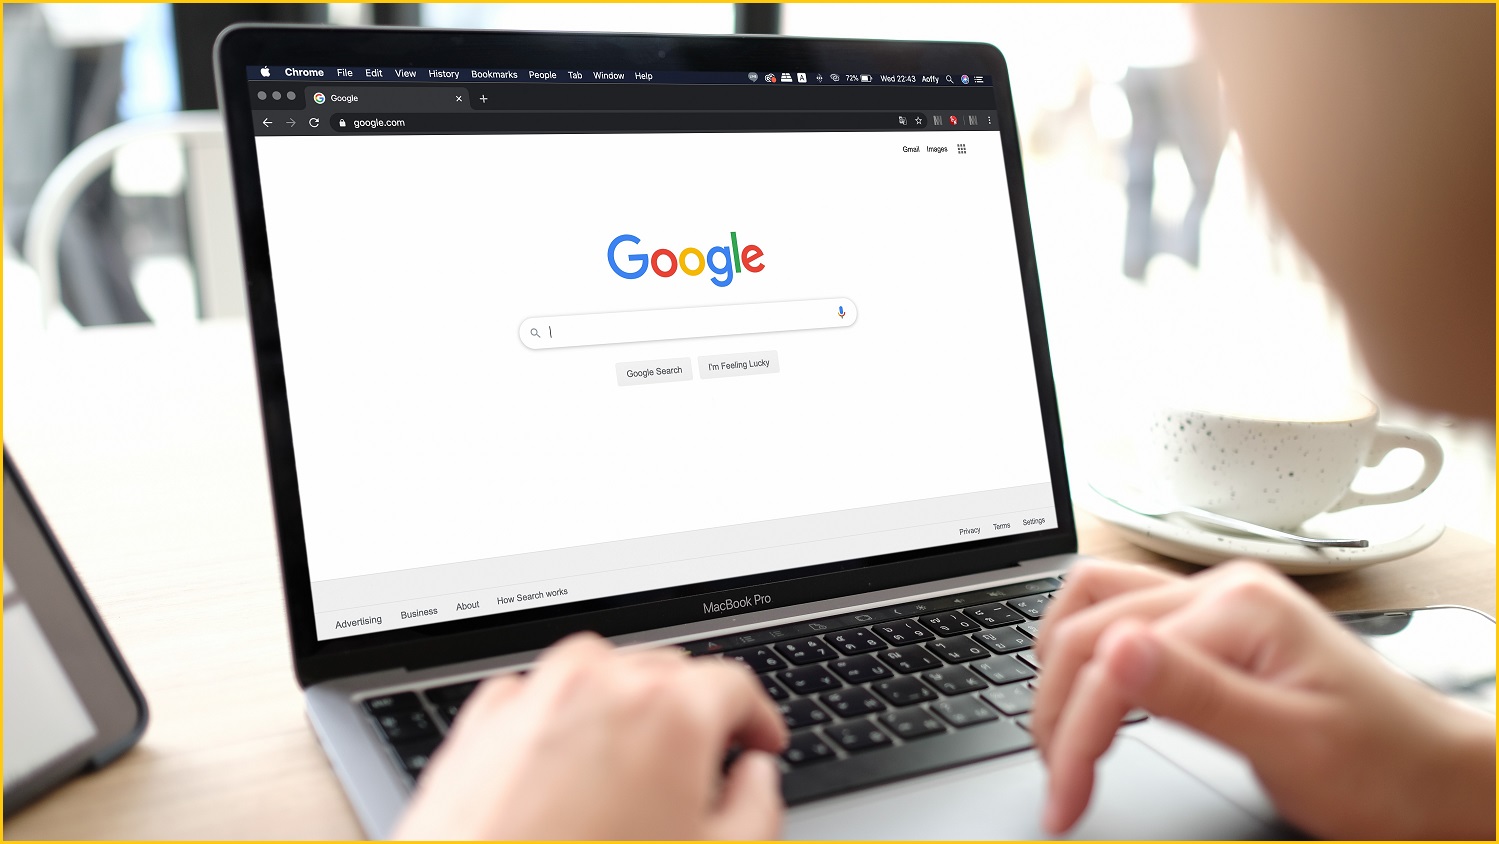 A person using Google search on their laptop.